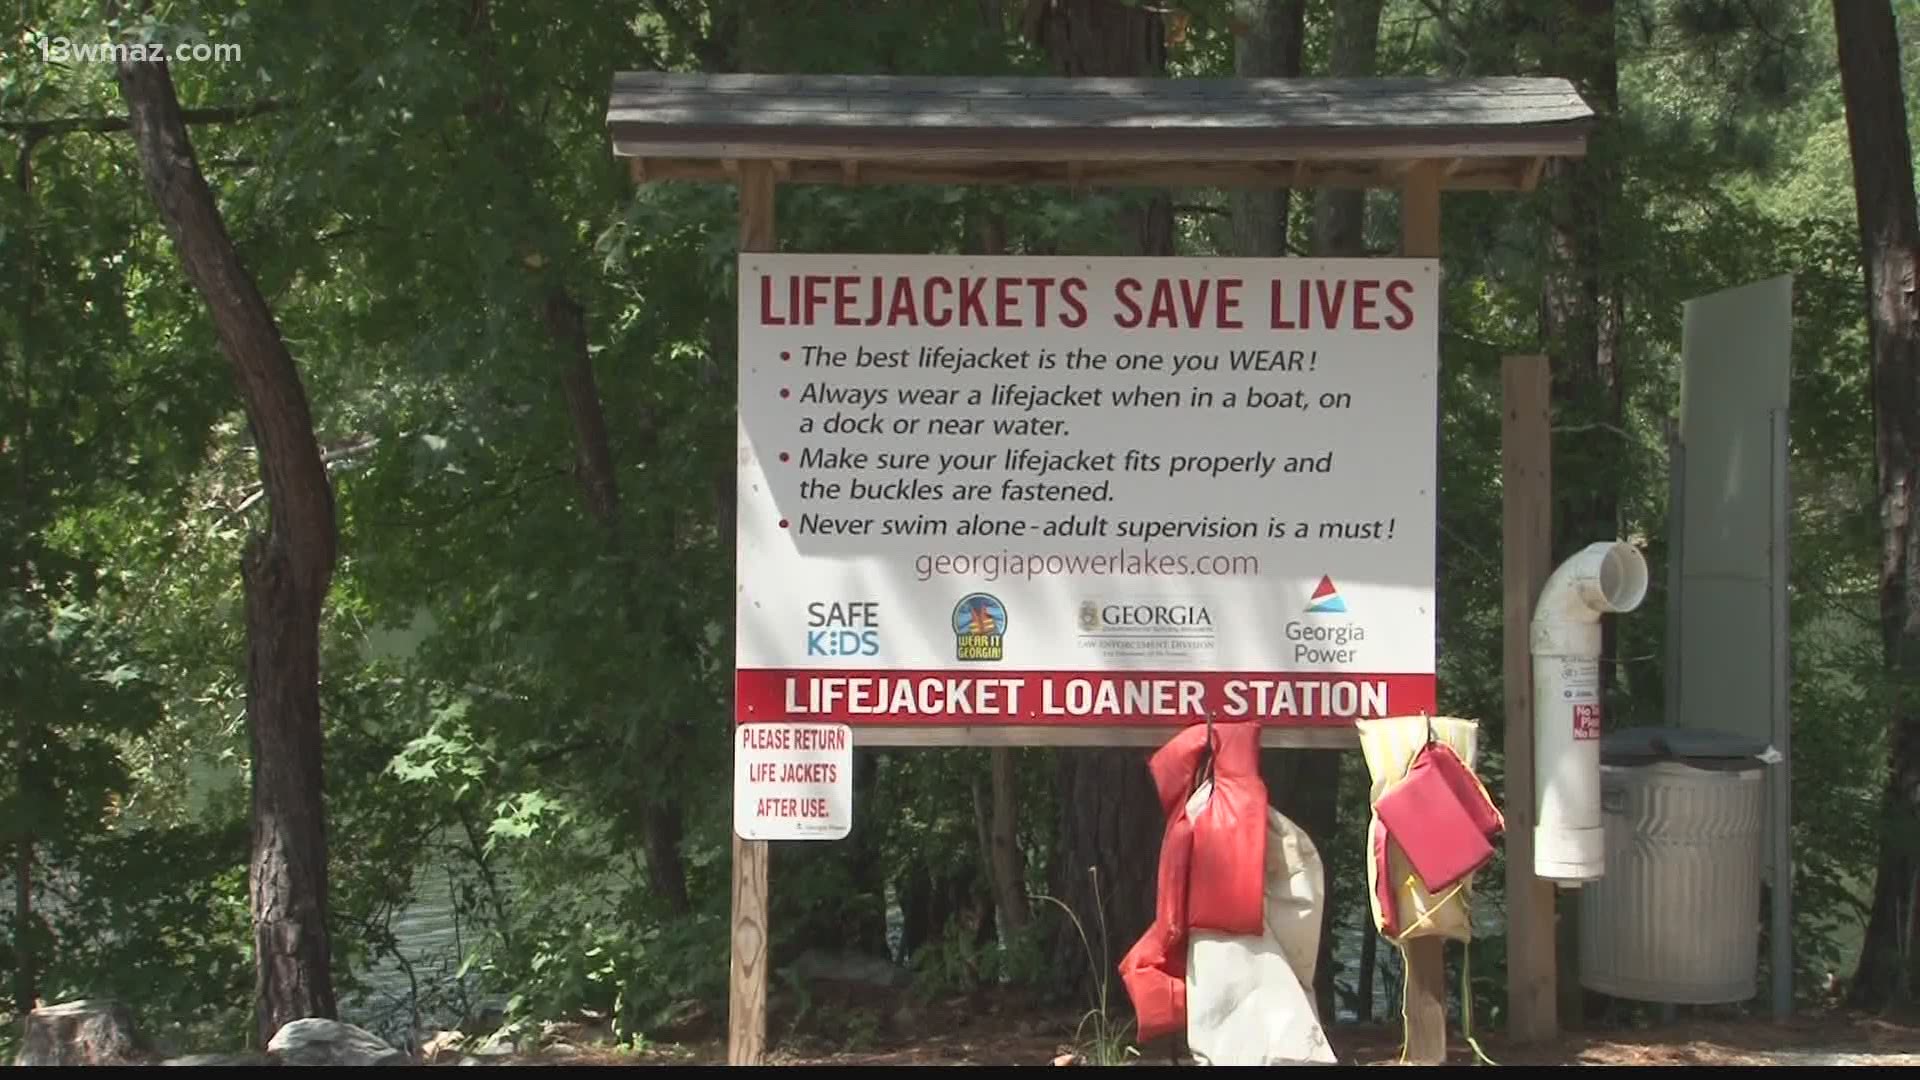 After 2 drownings at Bibb County's Lake Tobesofkee, life jackets are key to saving lives and it's now easy to suit up before you get on the water.